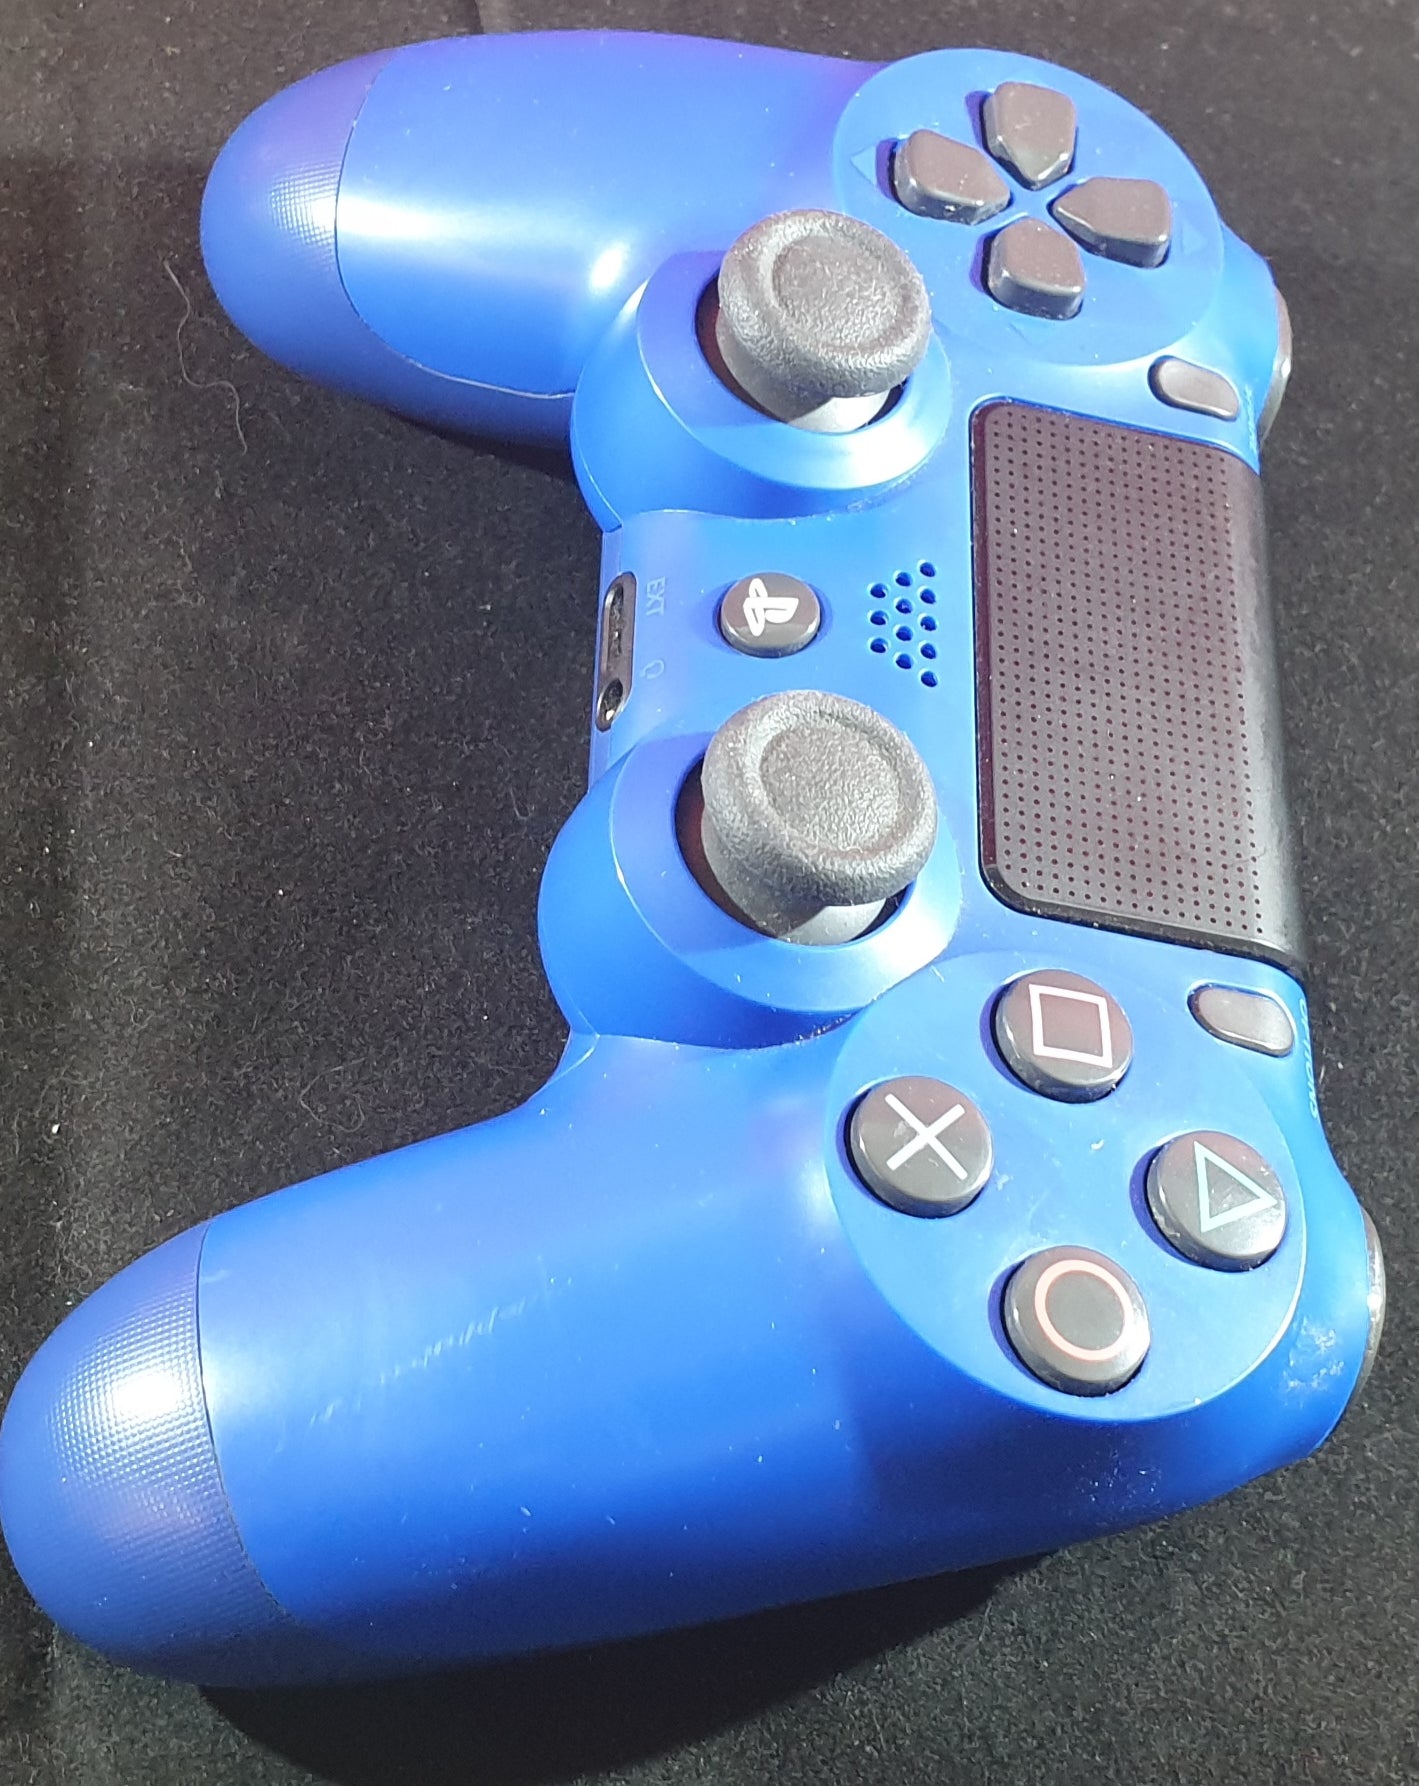 Blue Dualshock 4 Official Controller Sony Playstation 4 (PS4) Accessory